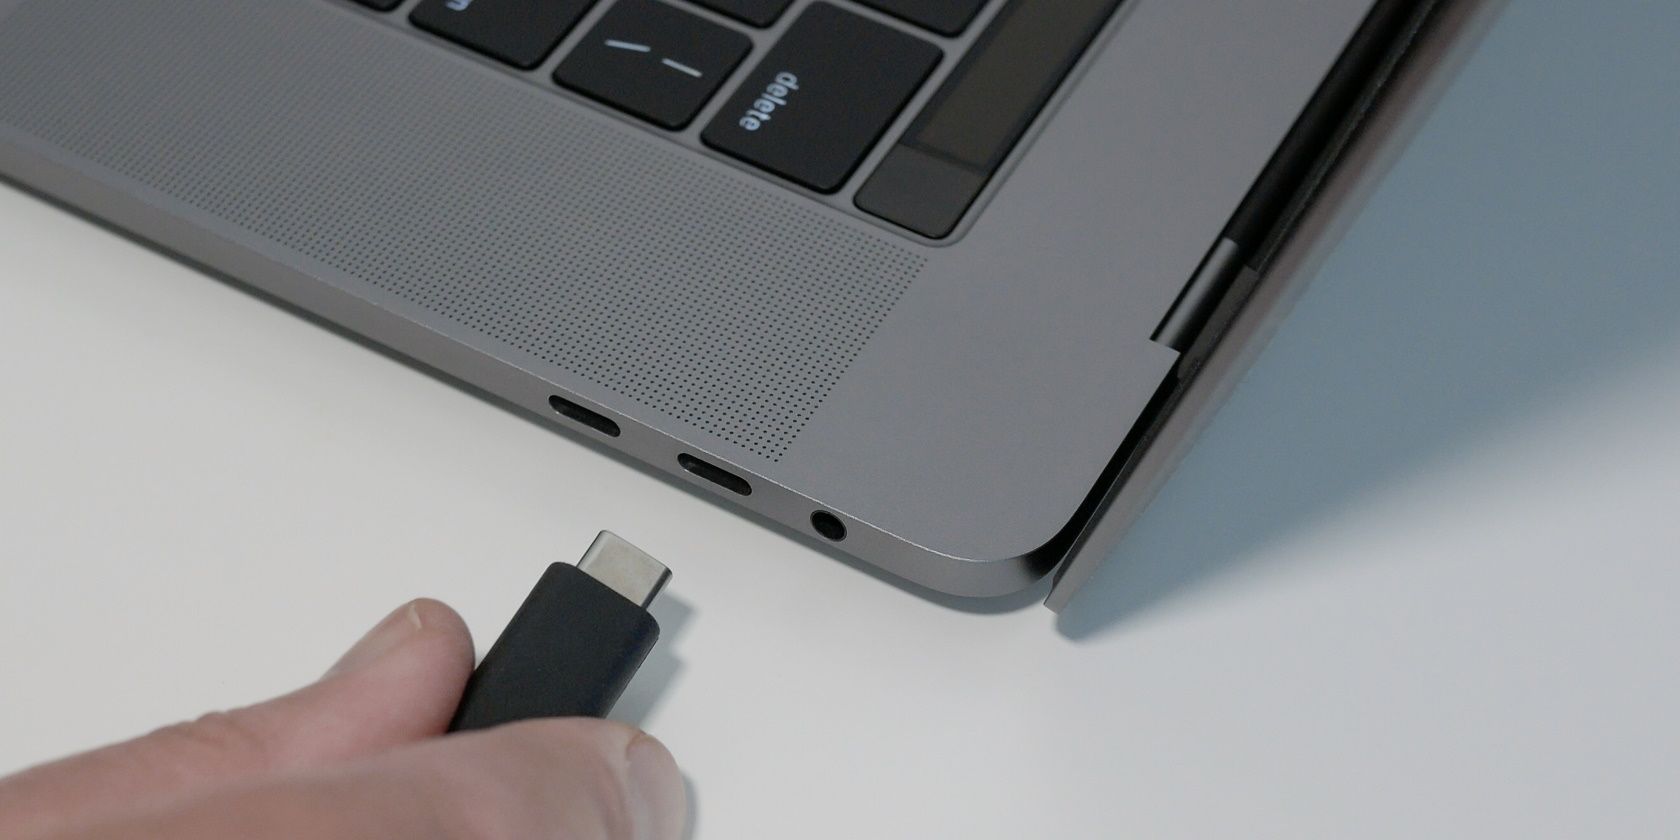 Man's hand plugging in a black USB Type C cable into the USB-C port on a laptop or notebook computer.